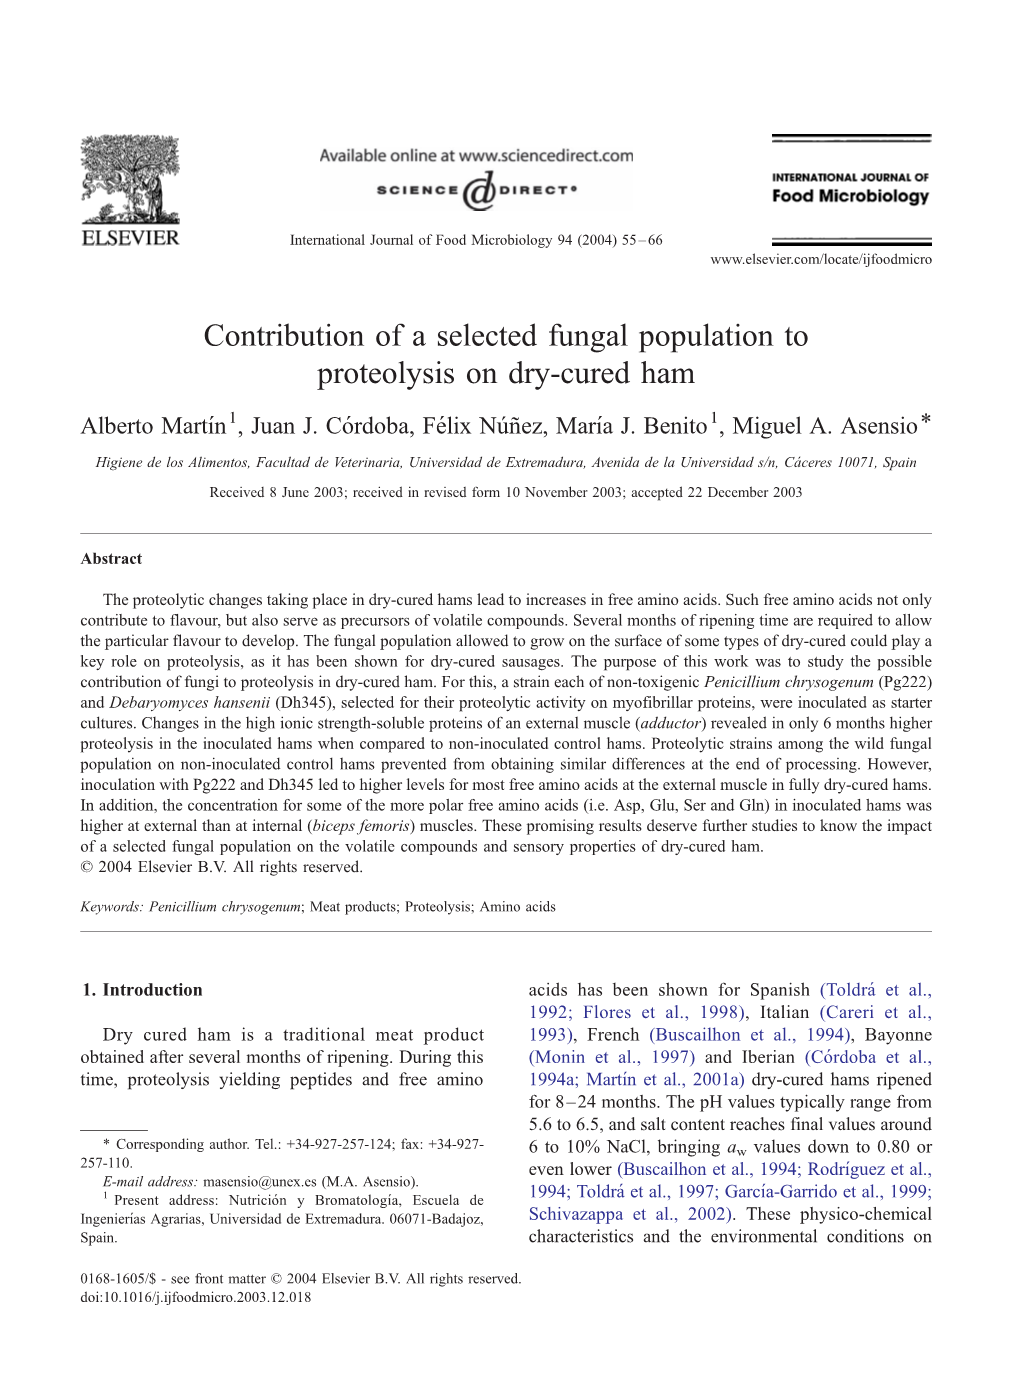 Contribution of a Selected Fungal Population to Proteolysis on Dry-Cured Ham